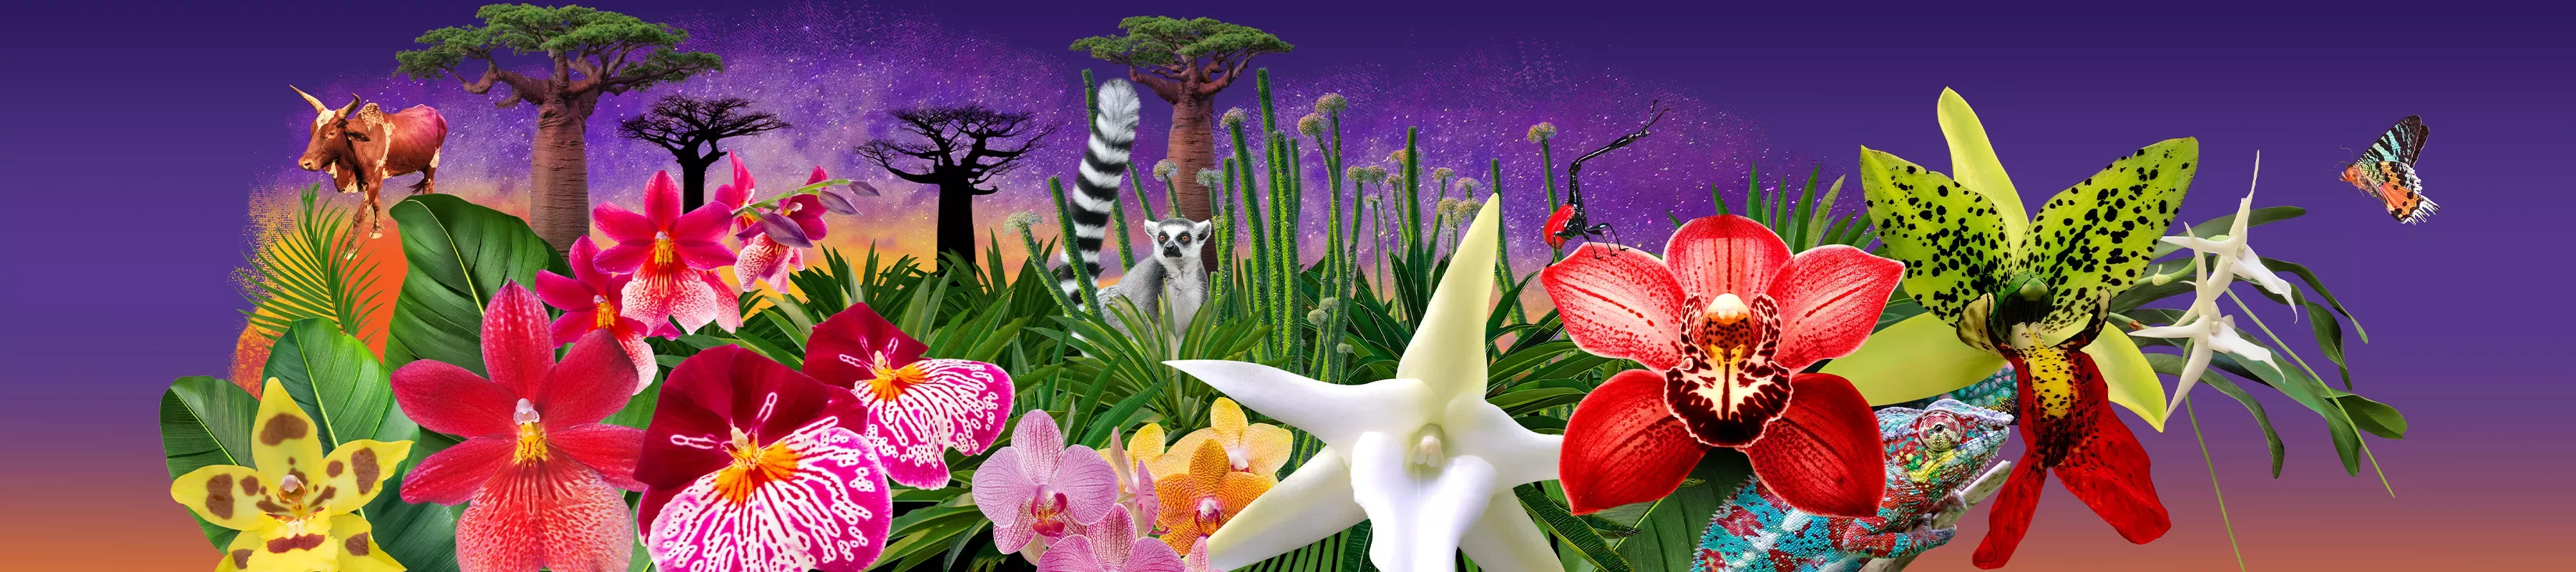 Colourful orchids against a background of baobab trees and lemurs against an evening sky